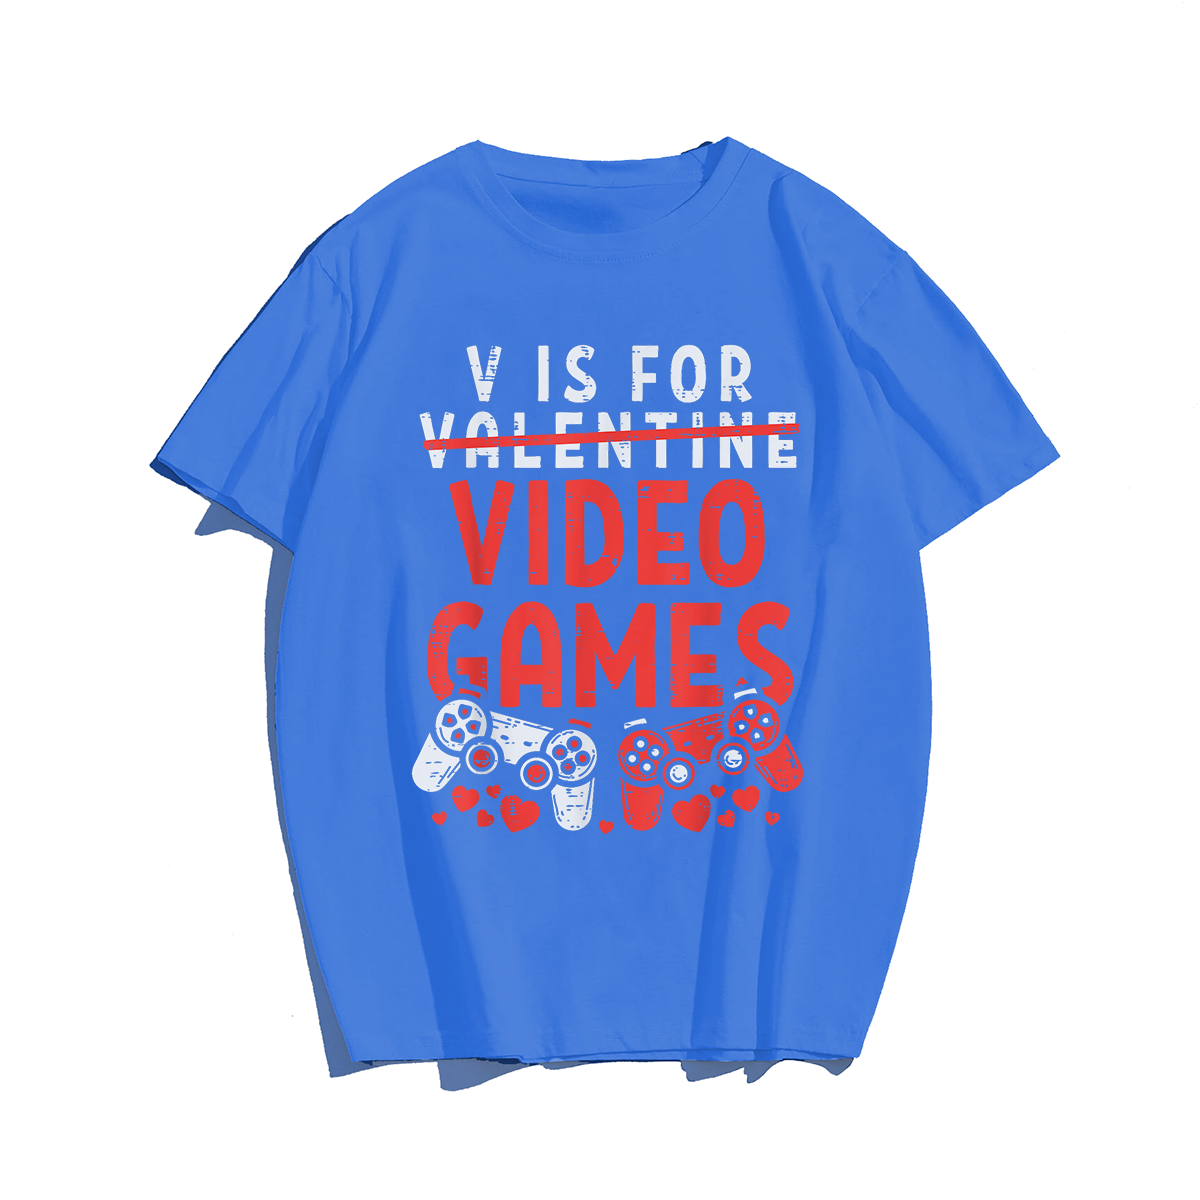 V IS FOR VIDEO GAMES Valentines Day T-Shirt, Men Plus Size Oversize T-shirt for Big & Tall Man